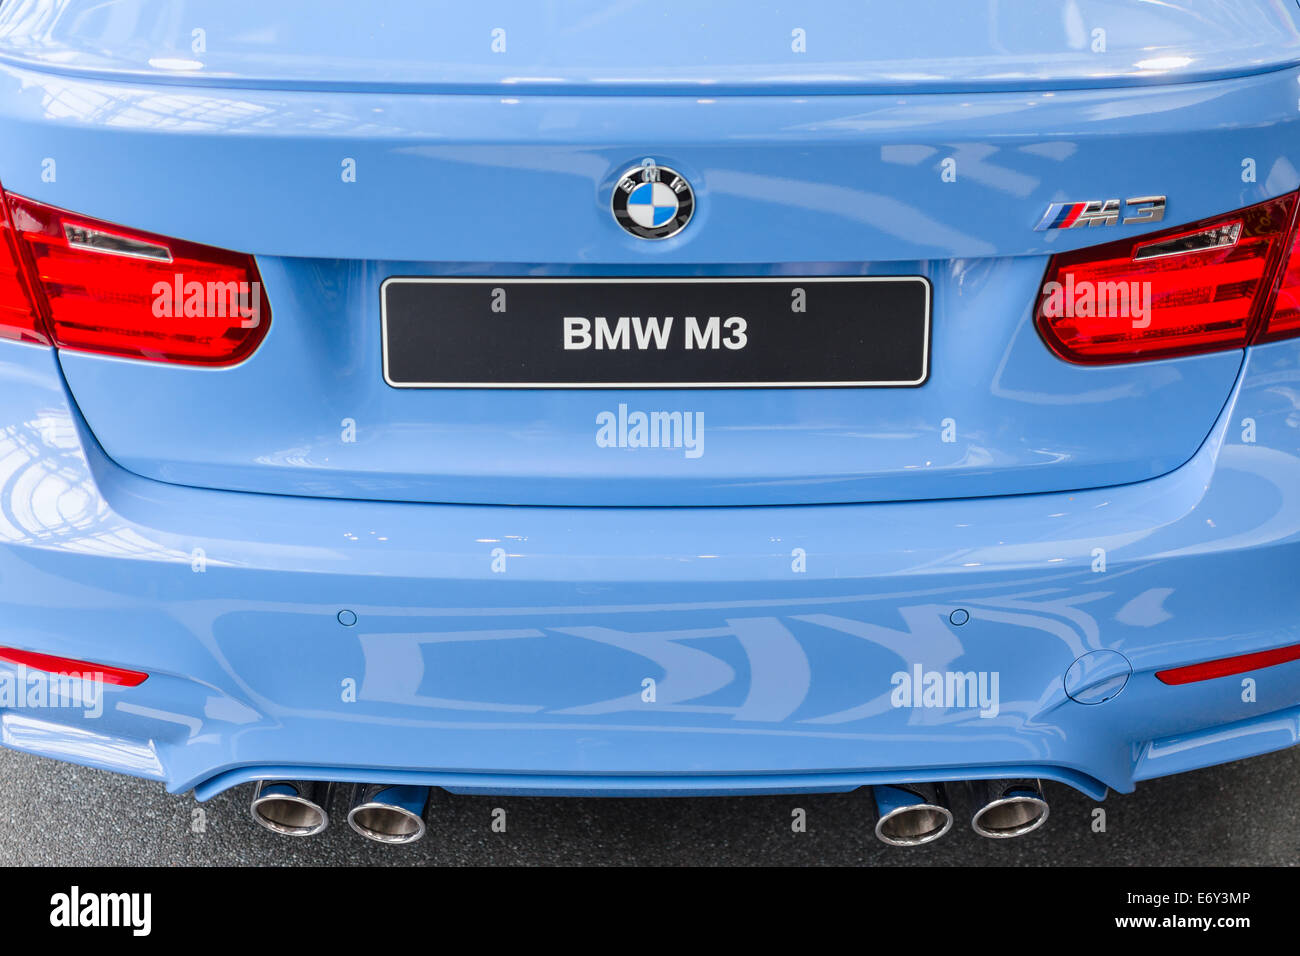 MUNICH, GERMANY - AUGUST 9, 2014: Rear view of new generation model BMW M3 - prestigious sports style car. Close-up details Stock Photo